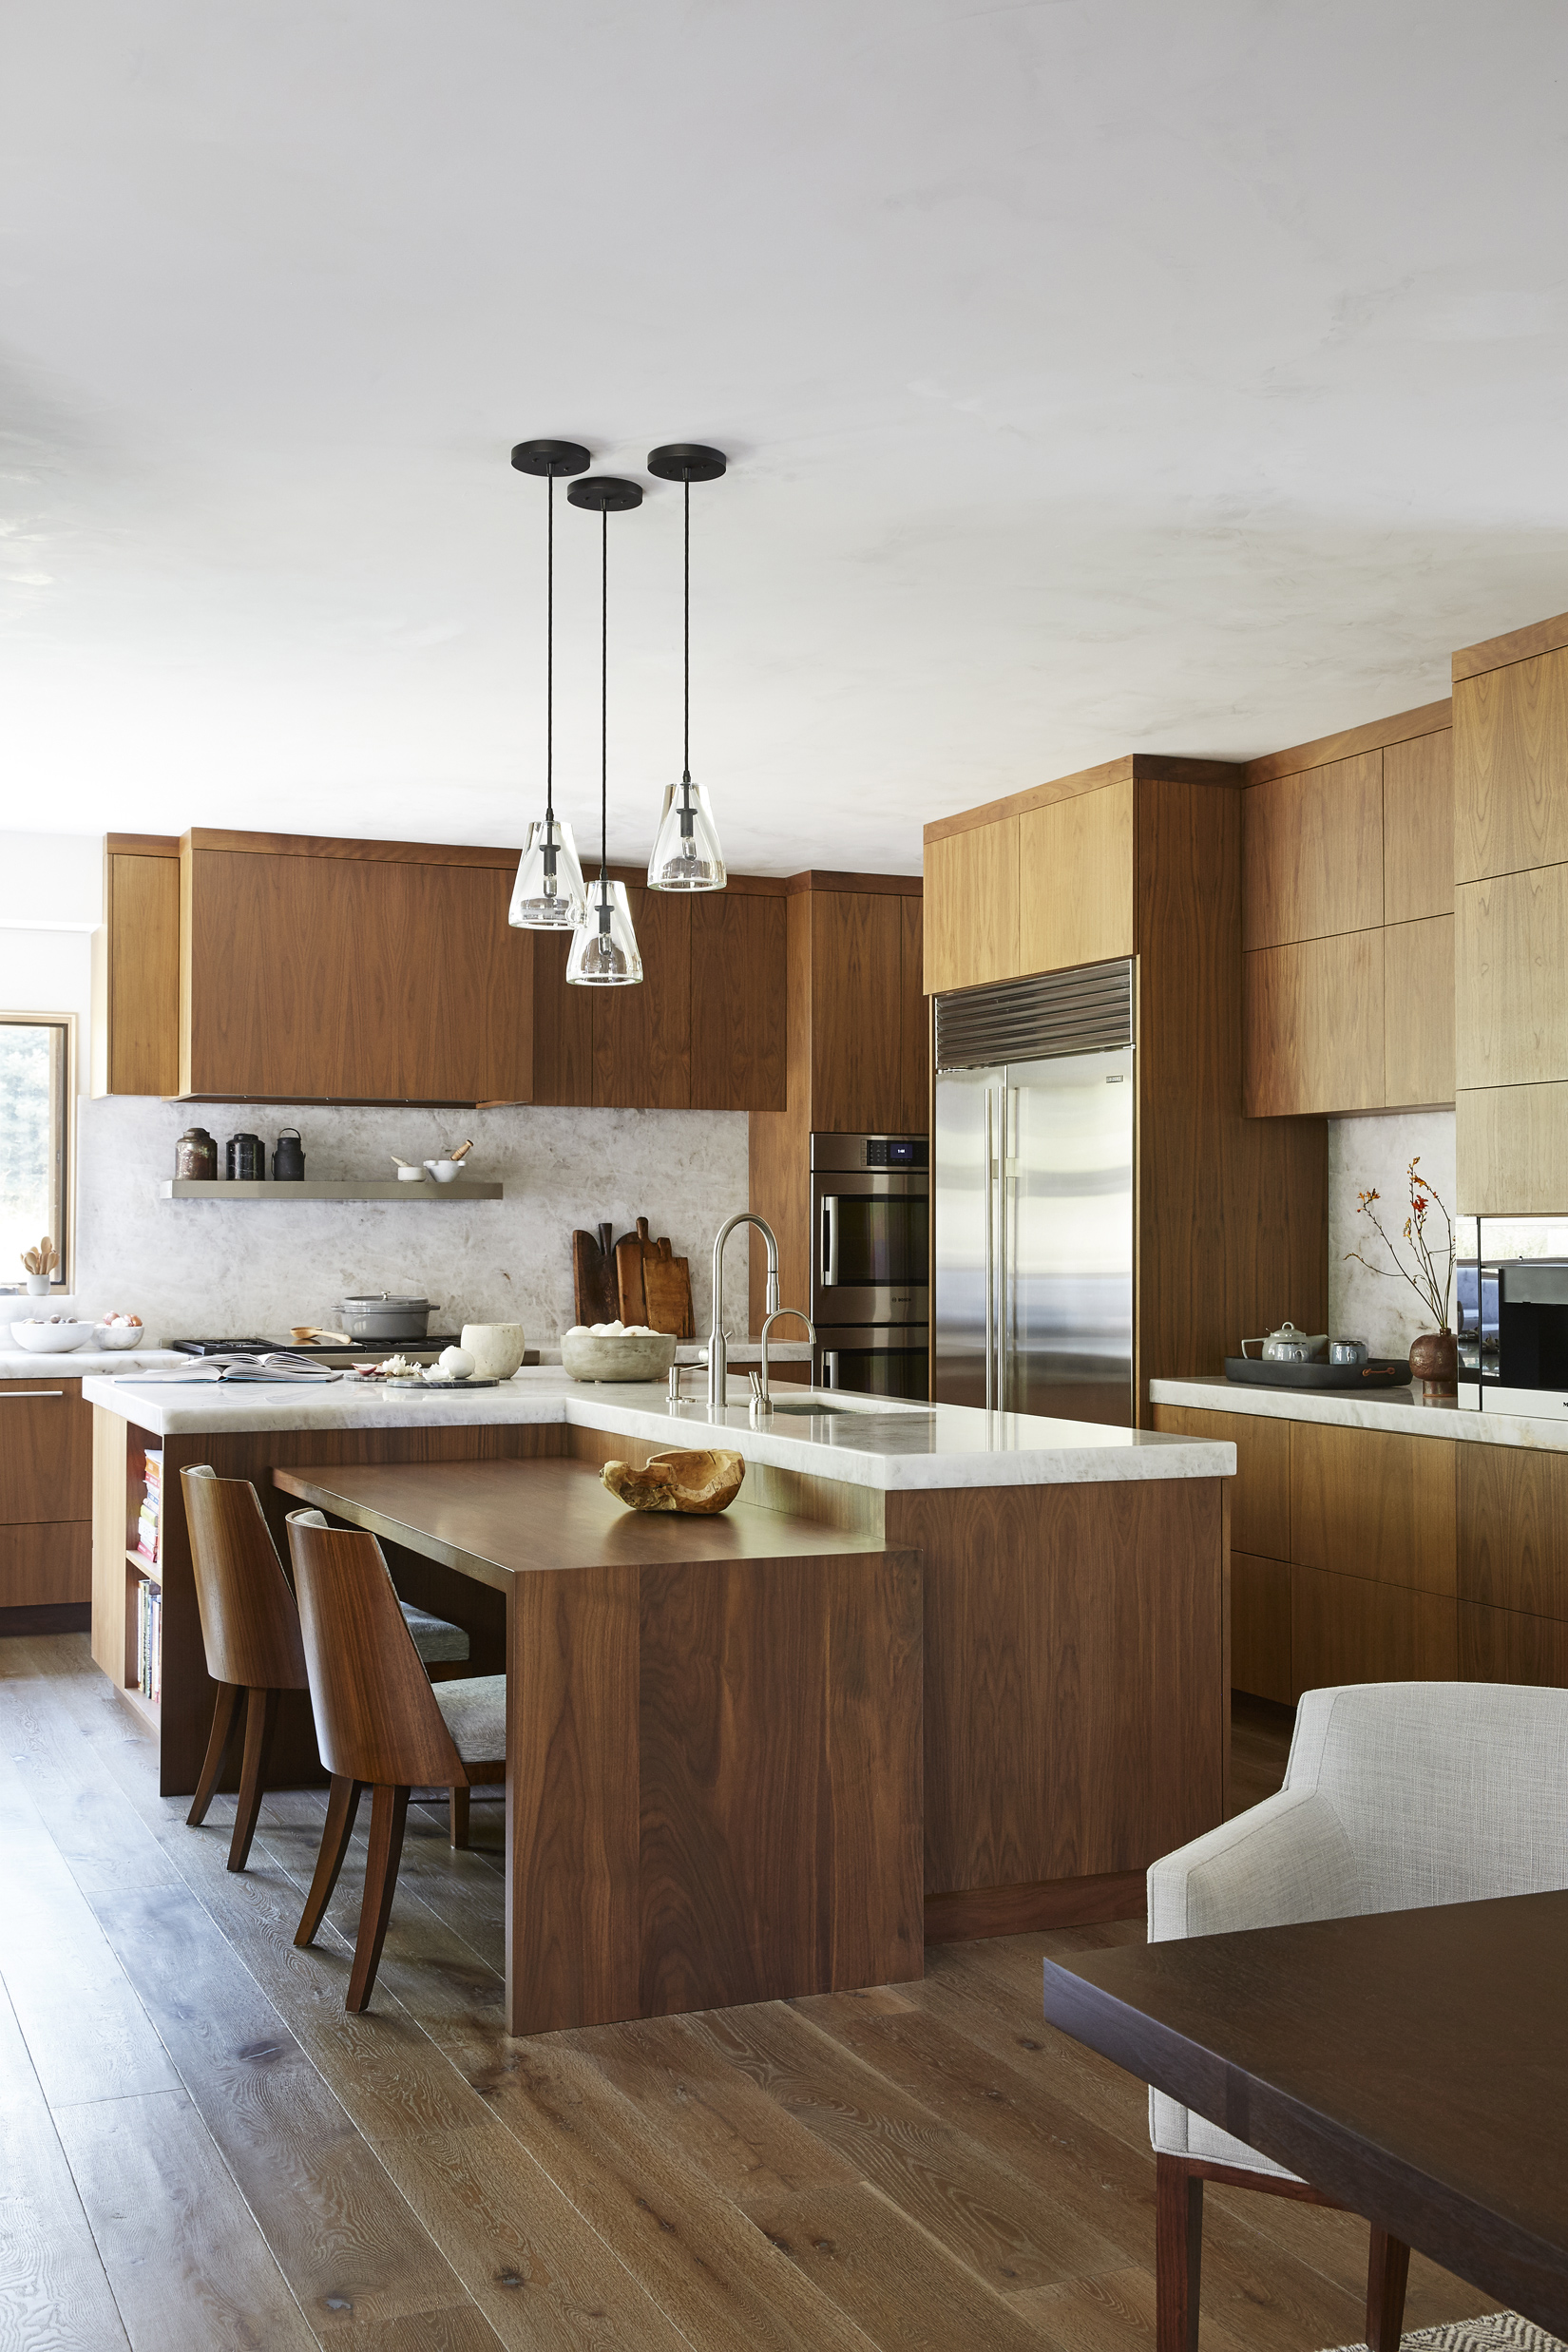 A Jackson Hole kitchen by WRJ Design, featured in the new book “The Perfect Kitchen,” uses clean lines and natural wood to create harmony in a busy family space (photo by William Abranowicz).